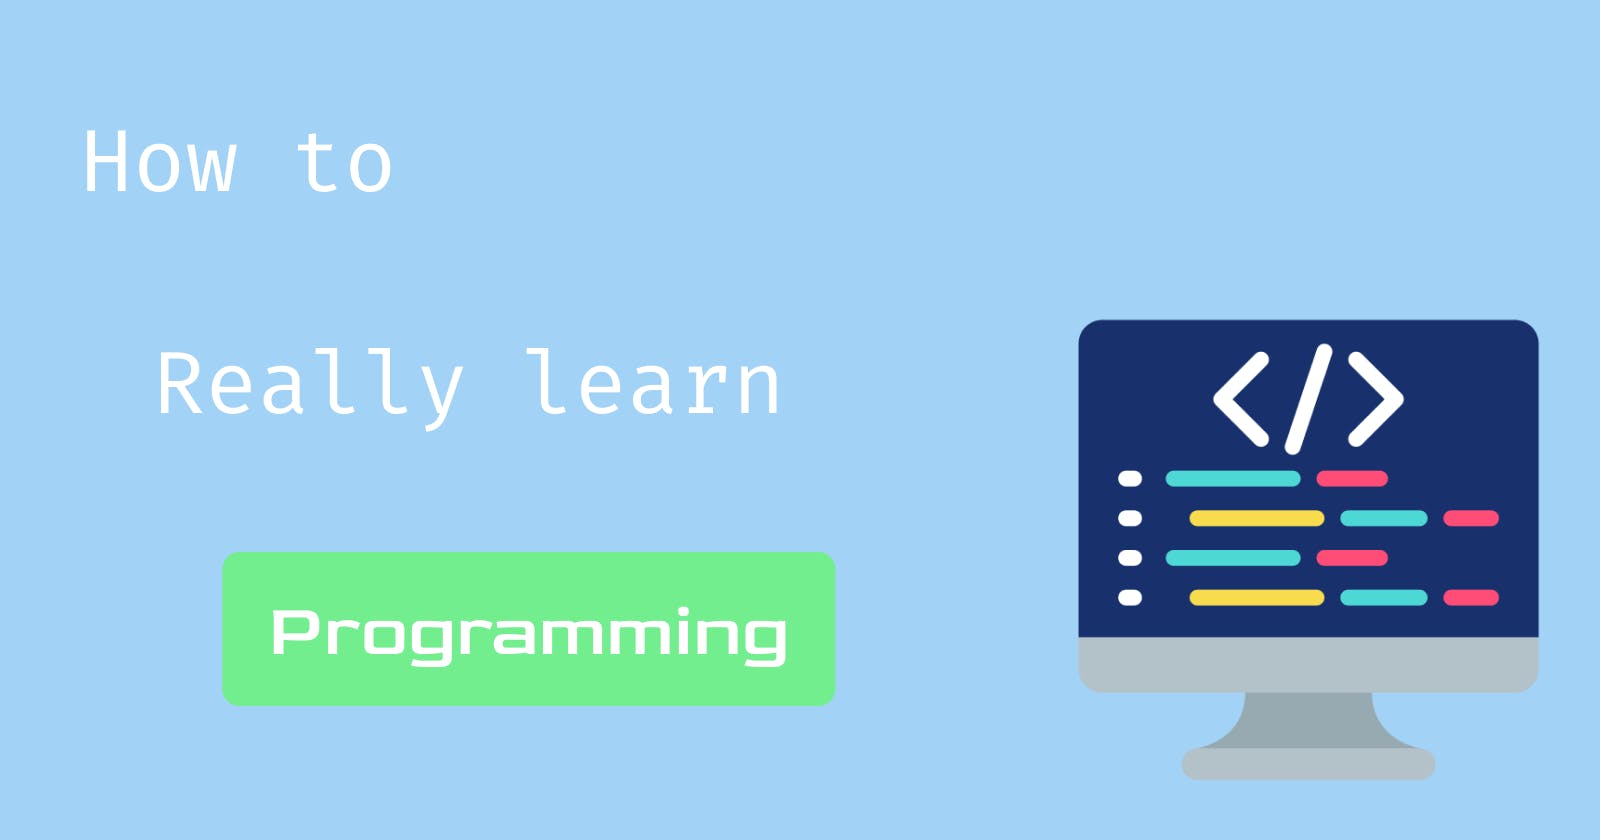 How to learn programming the real way